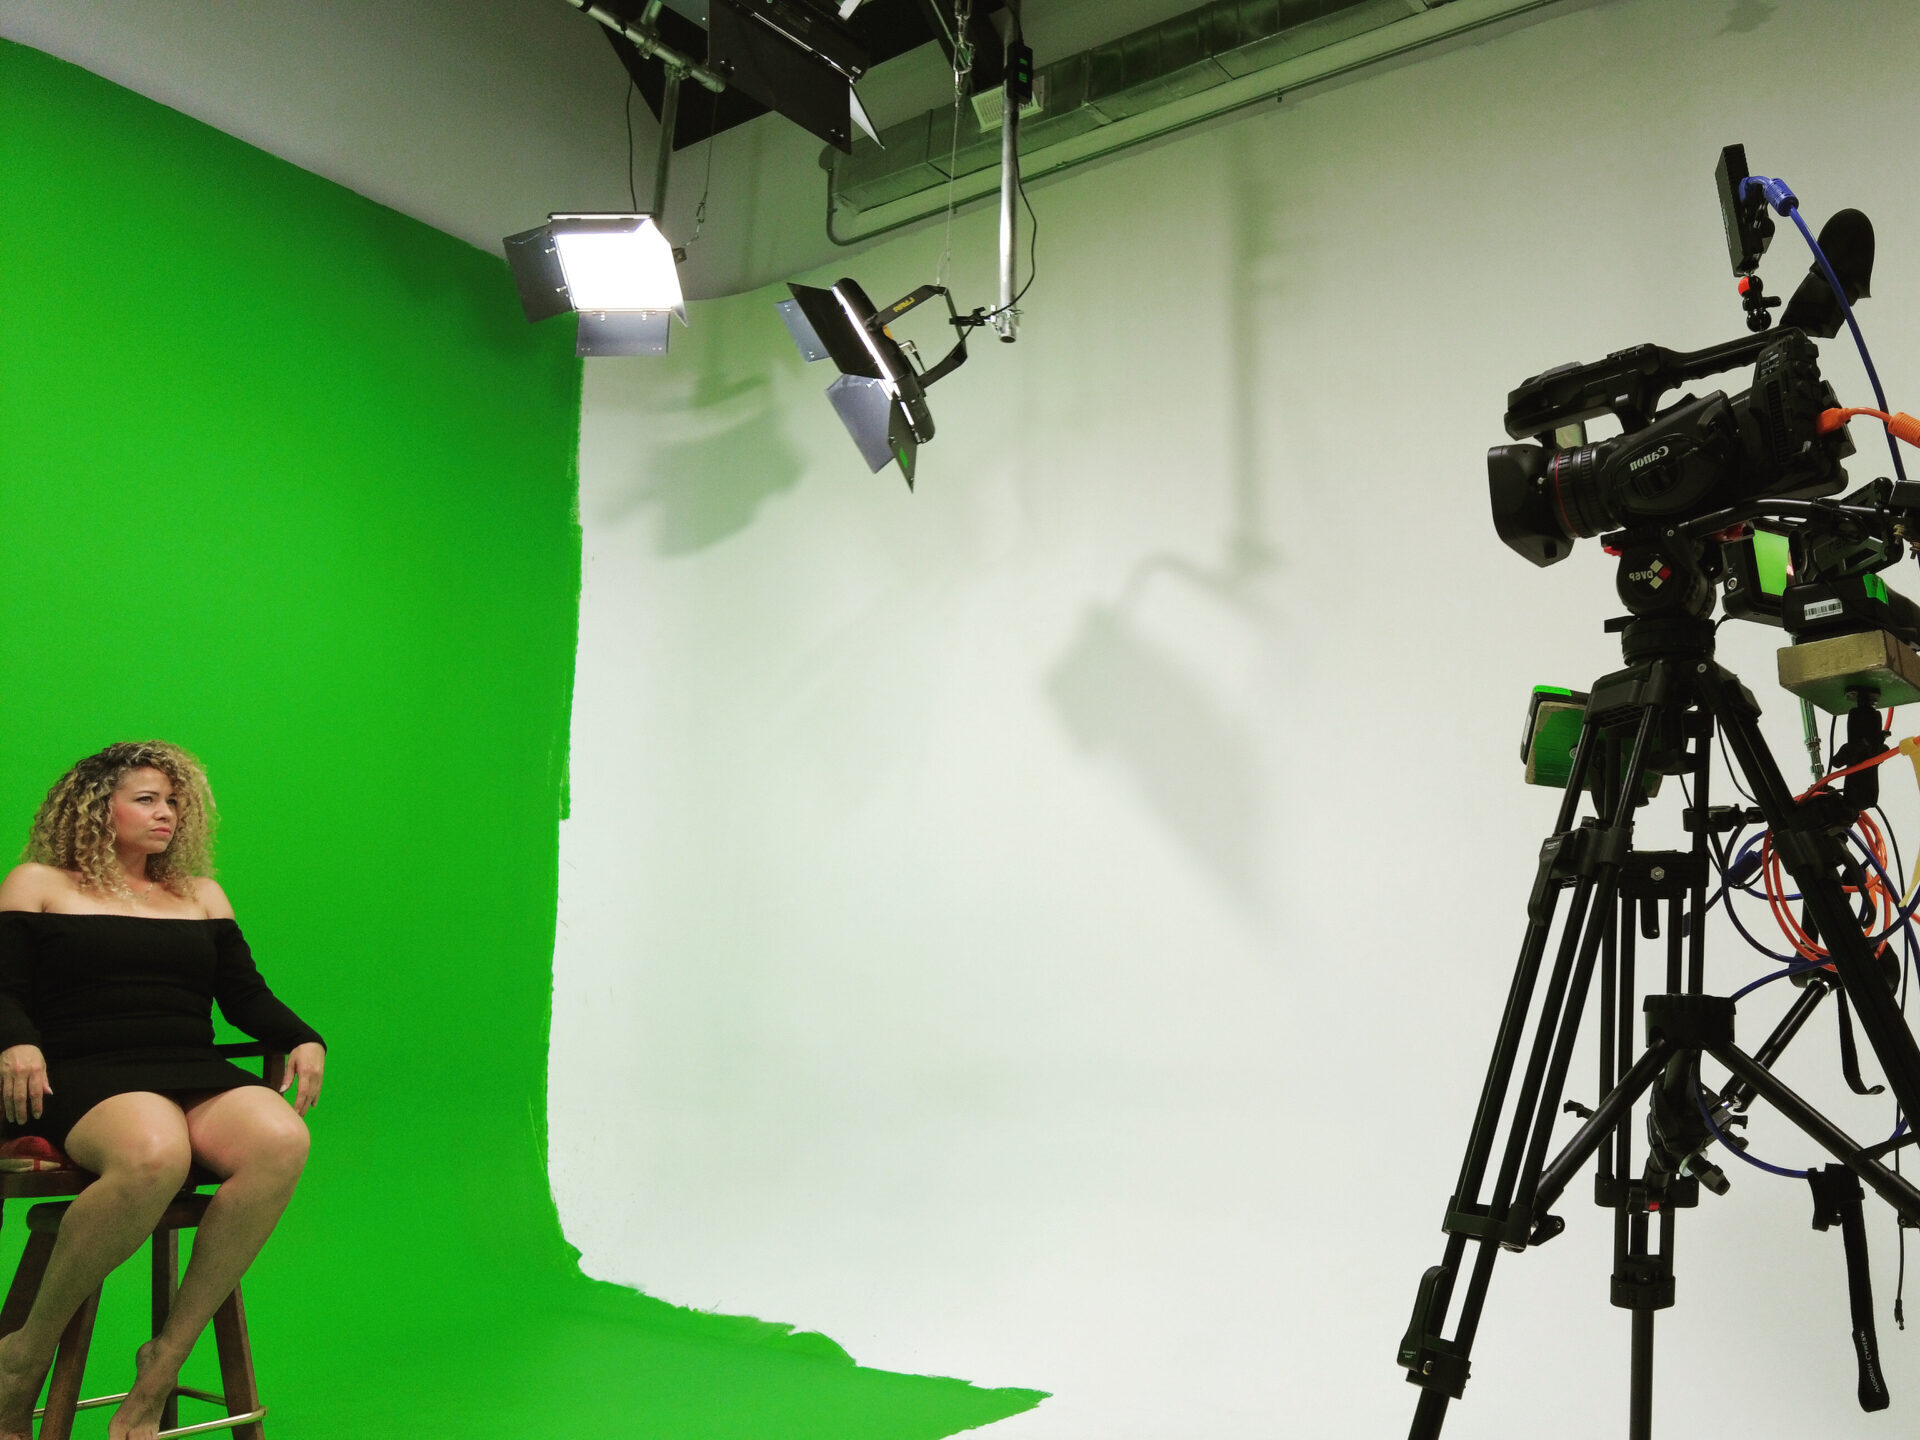 Green screen music video production in studio with Genie Lamp Studios.